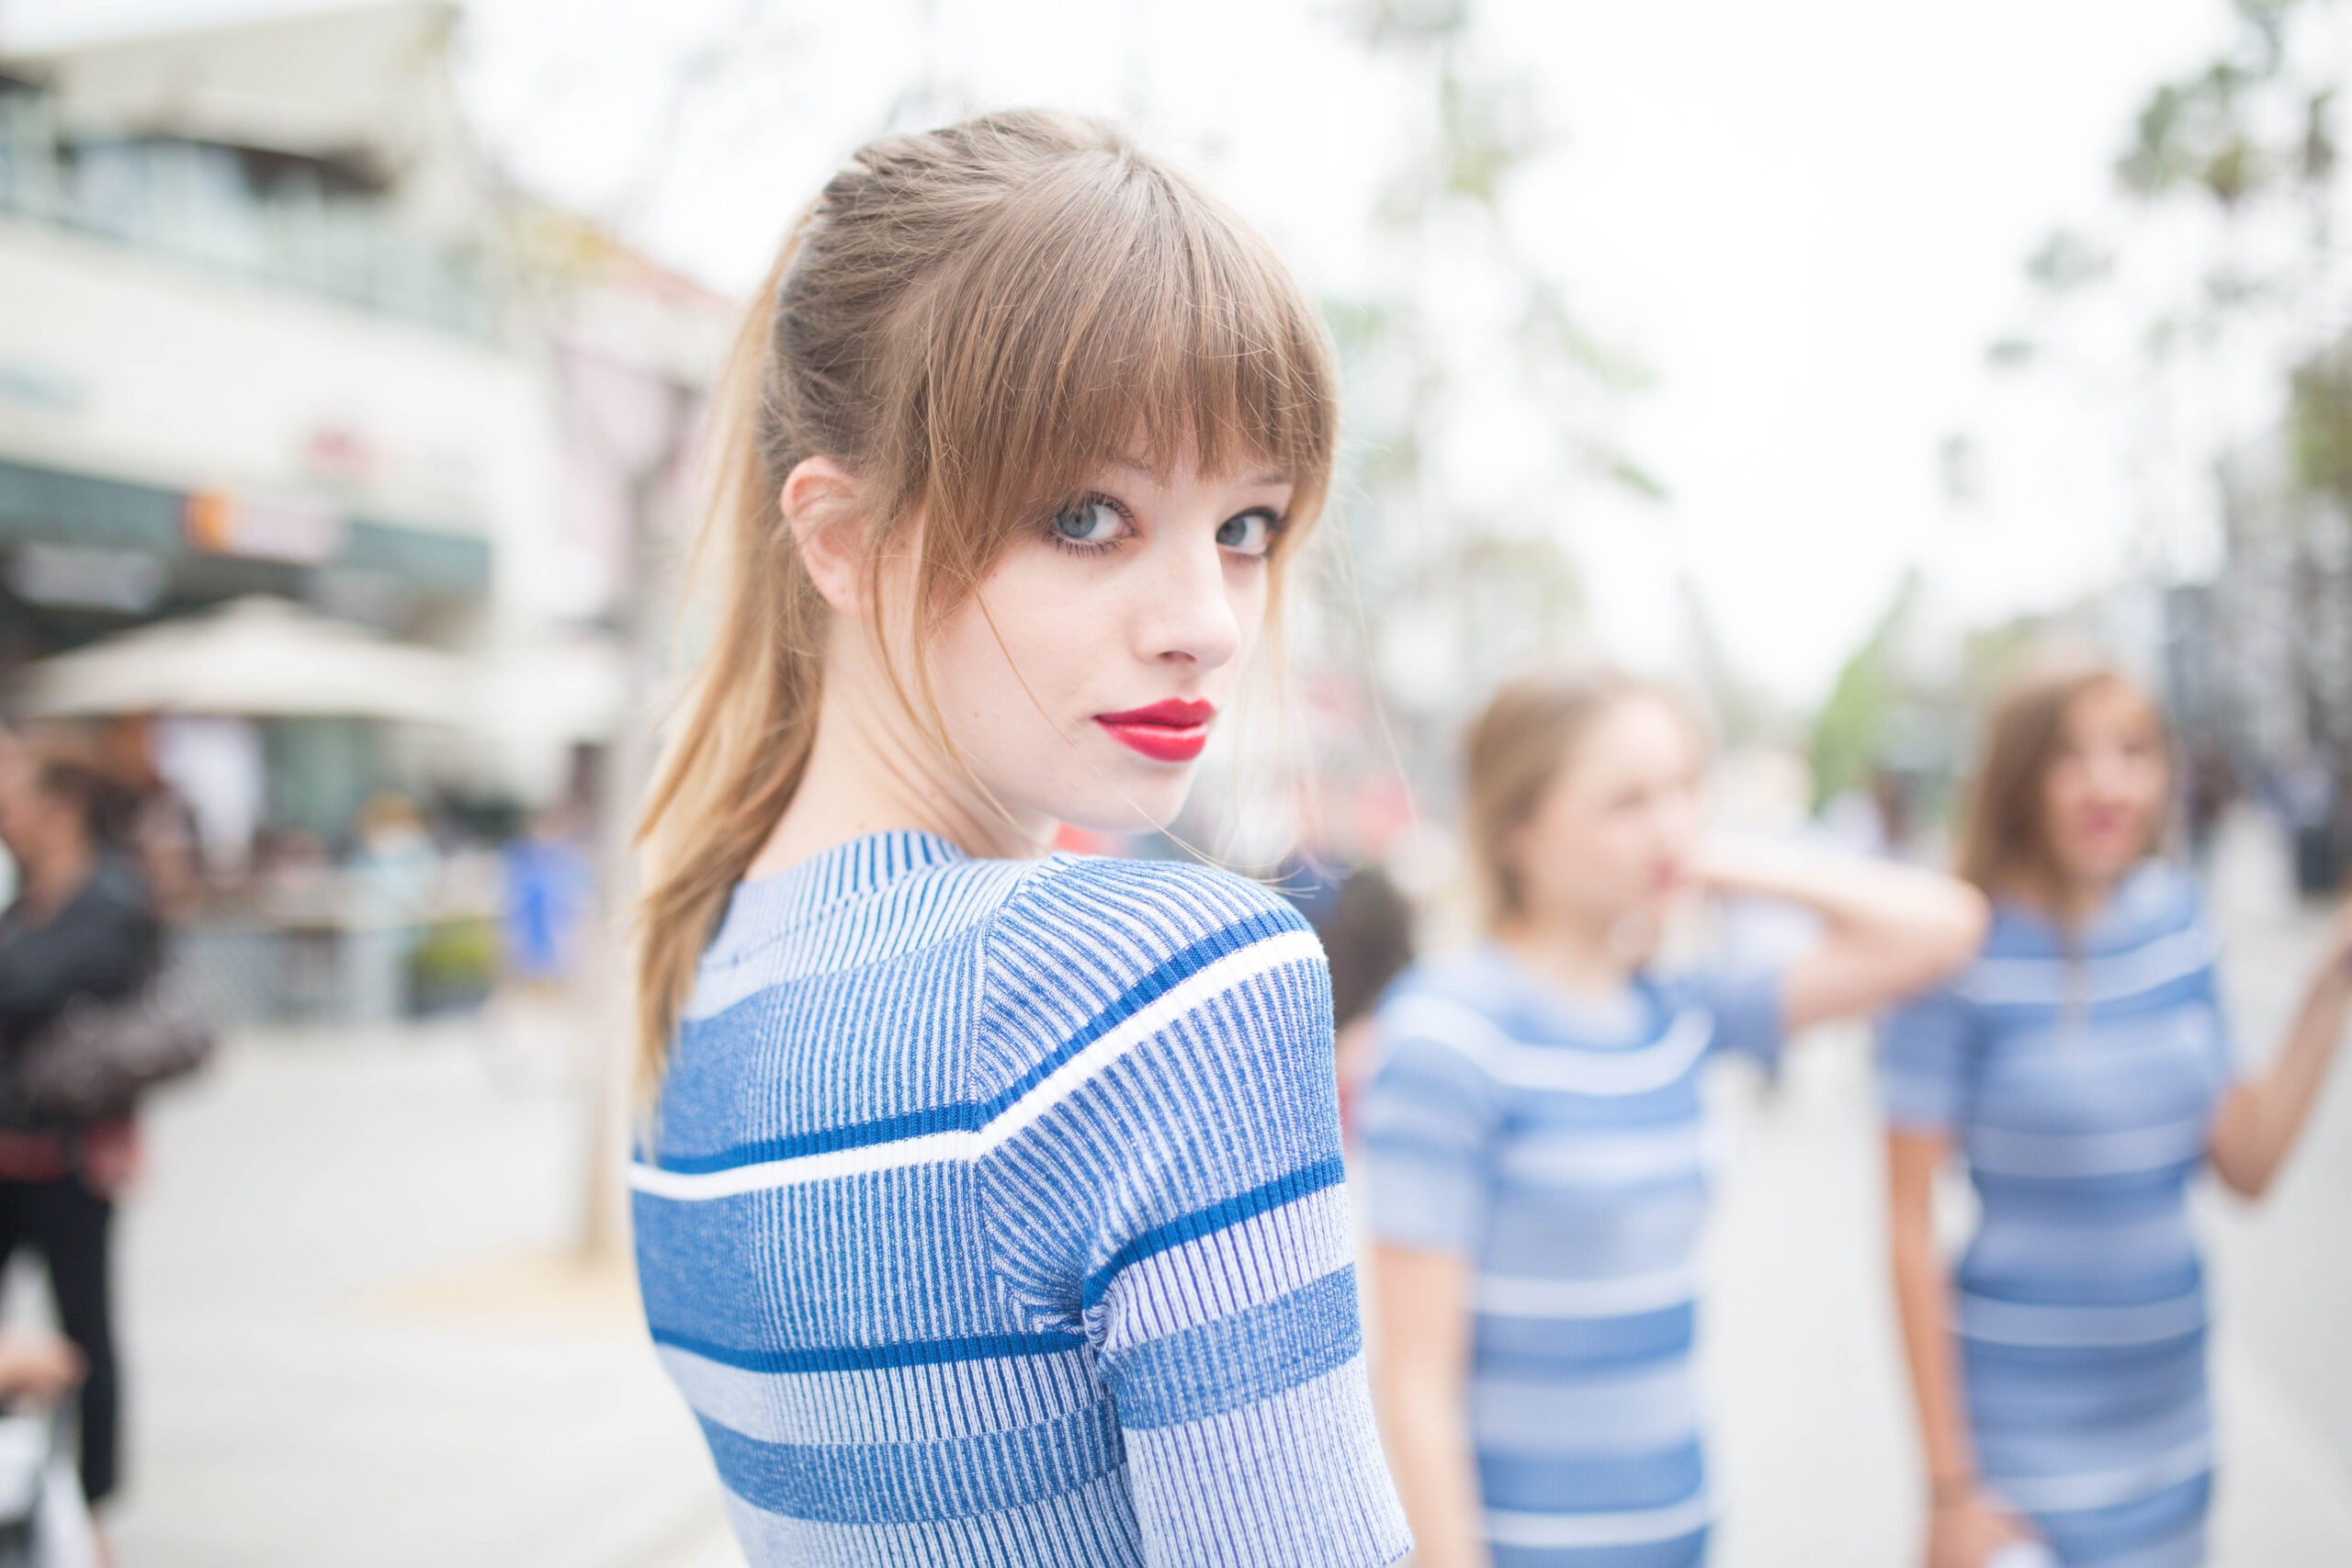 a person with red lipstick and blue striped shirt